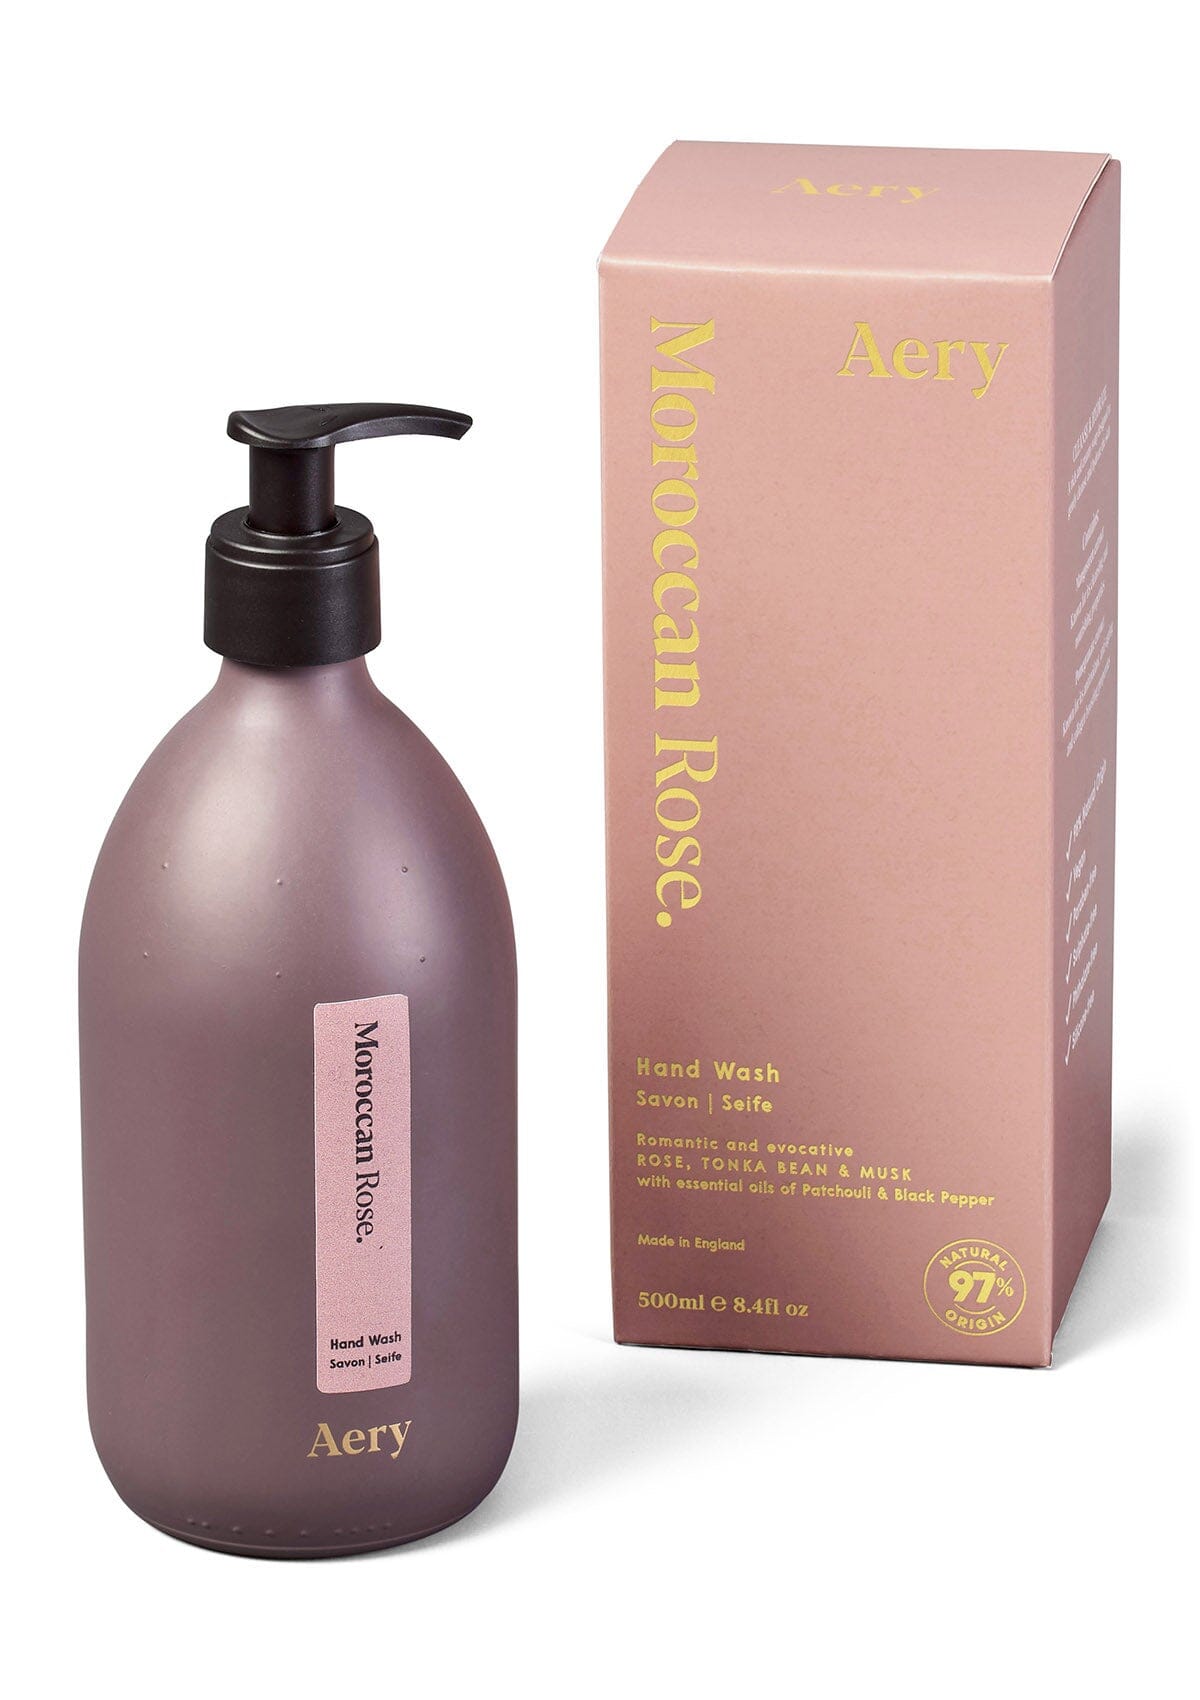 Aubergine Moroccan Rose hand wash by Aery on white background 